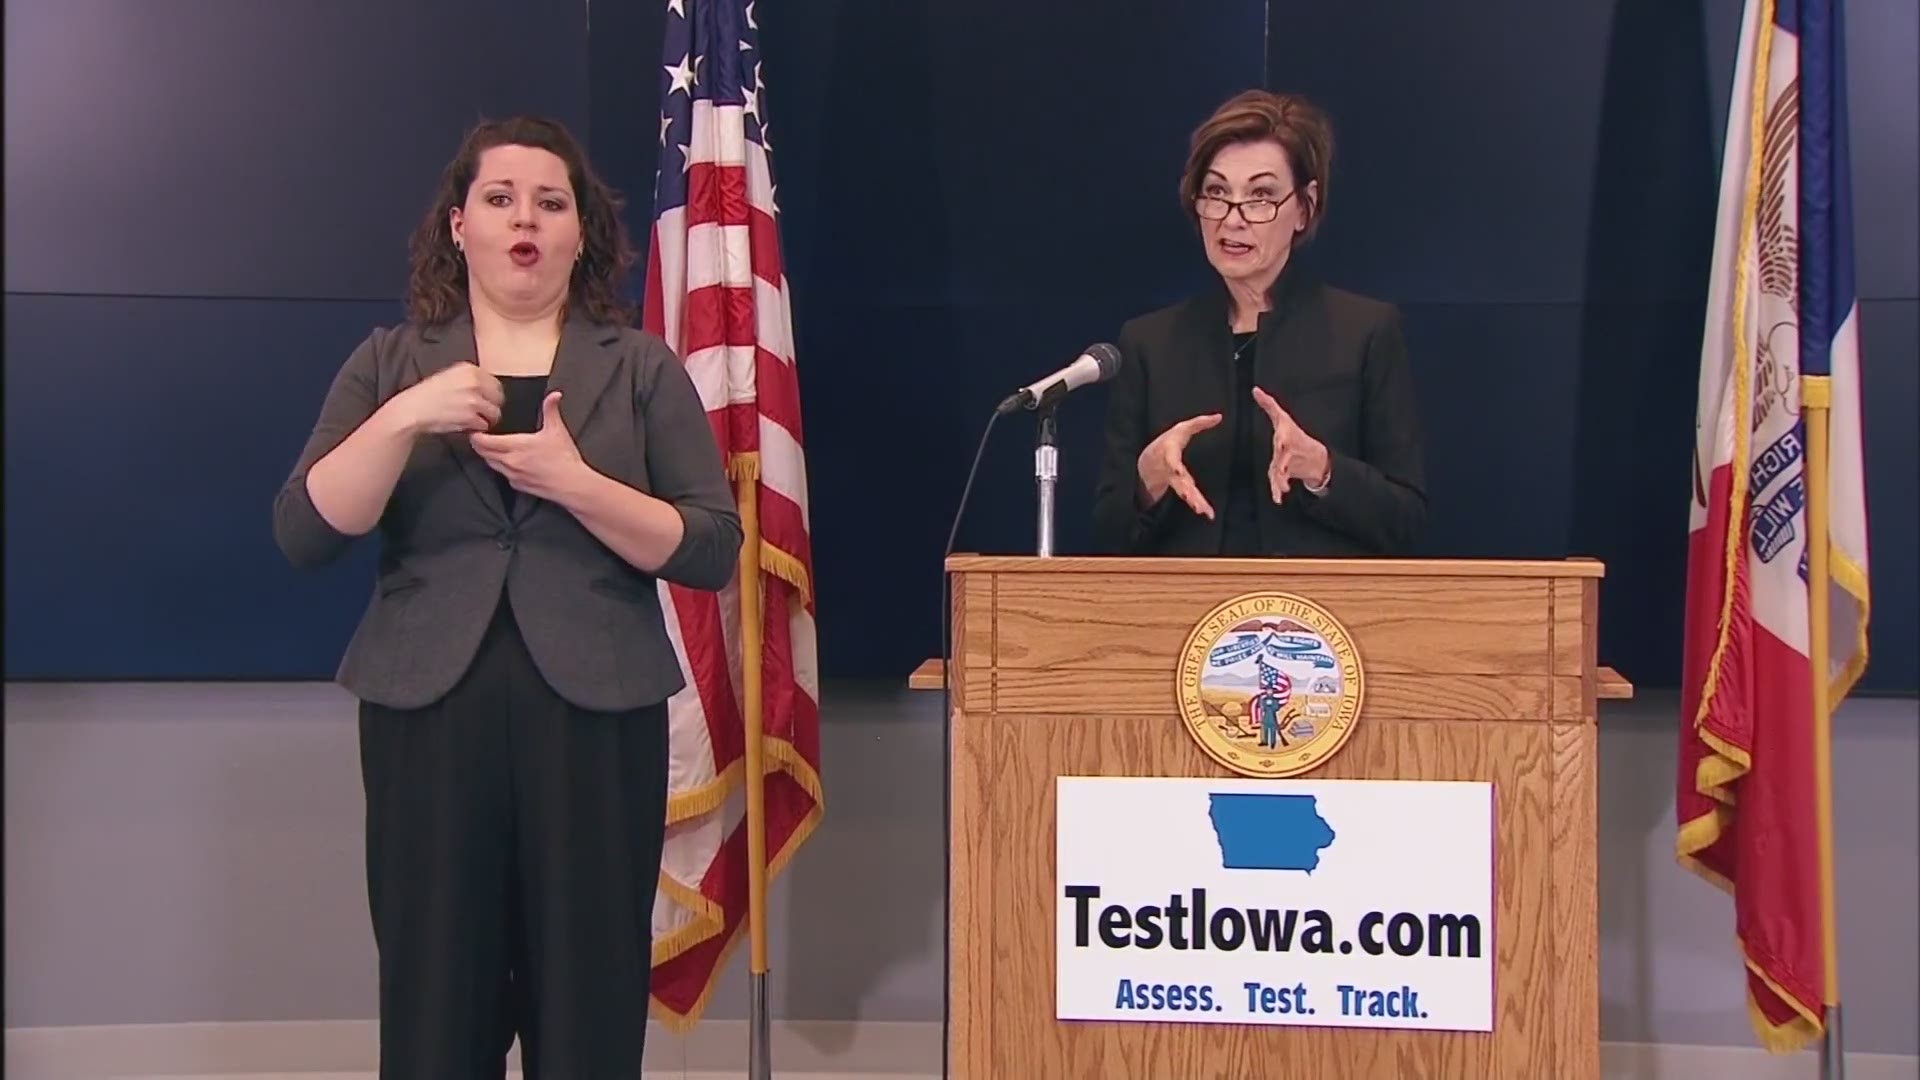 Utah companies are helping roll out the Test Iowa initiative but do not have access to the personal health data